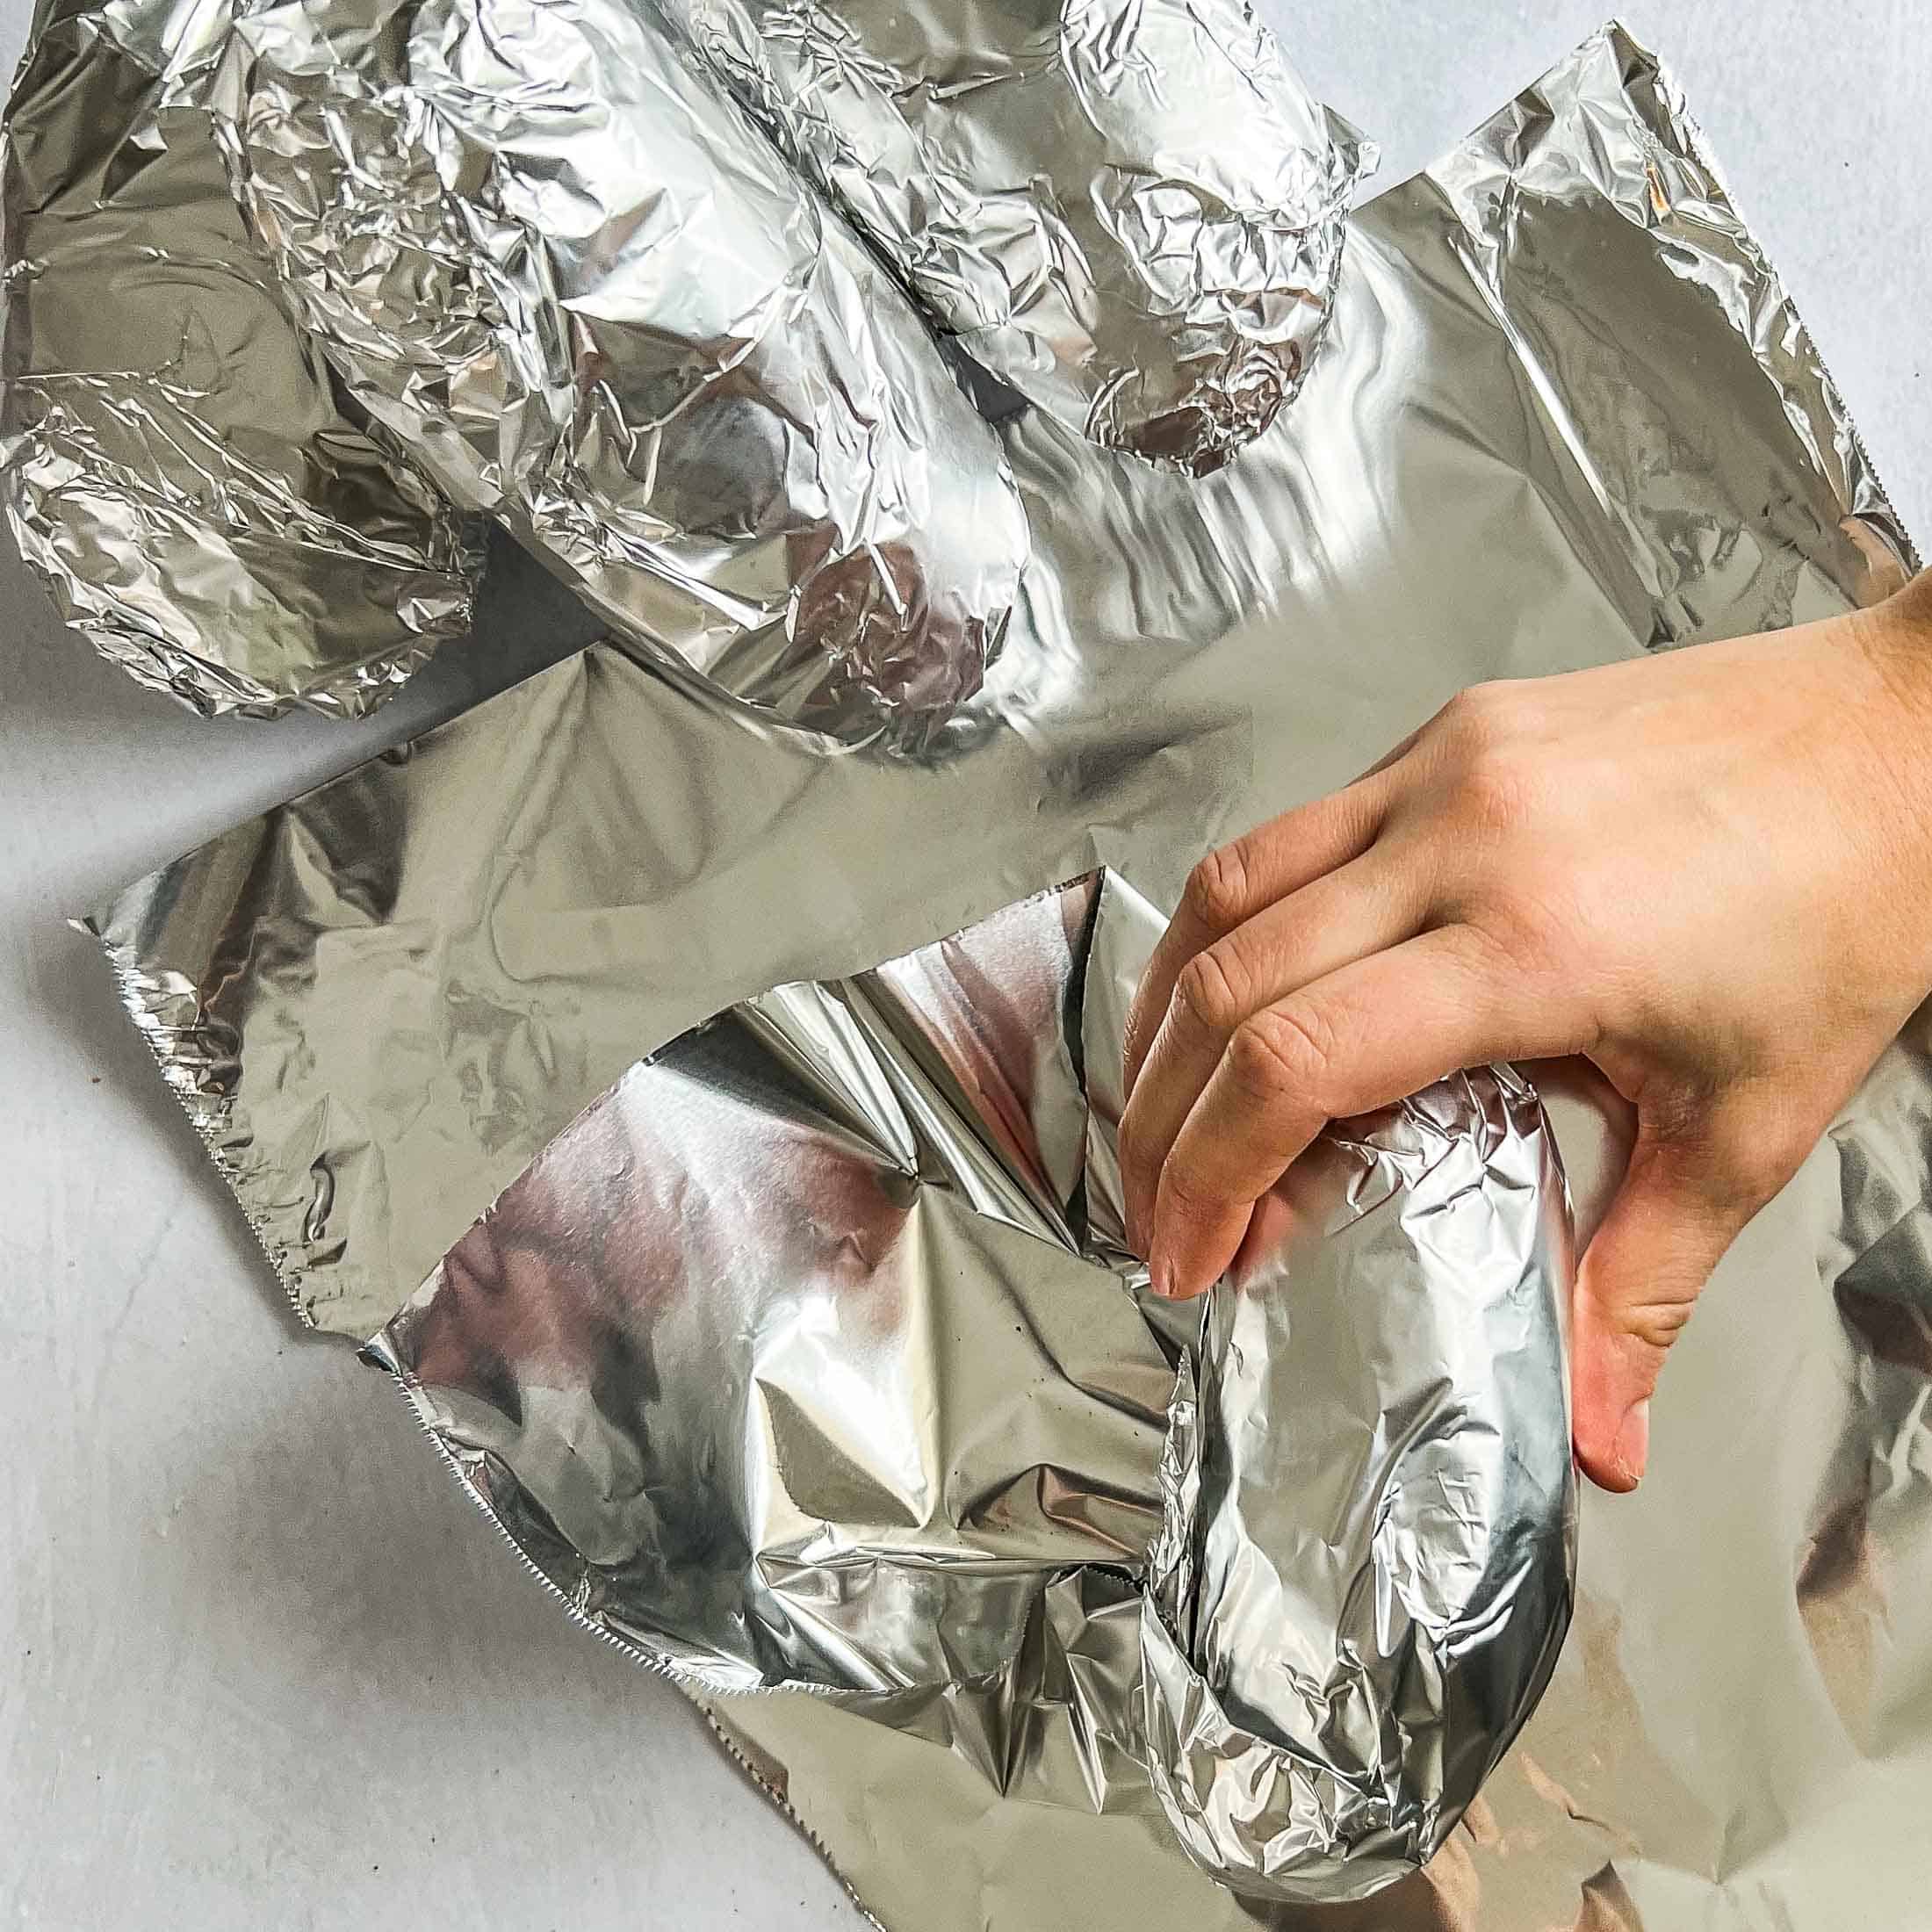 Wrapping a potato in aluminum foil before smoking.